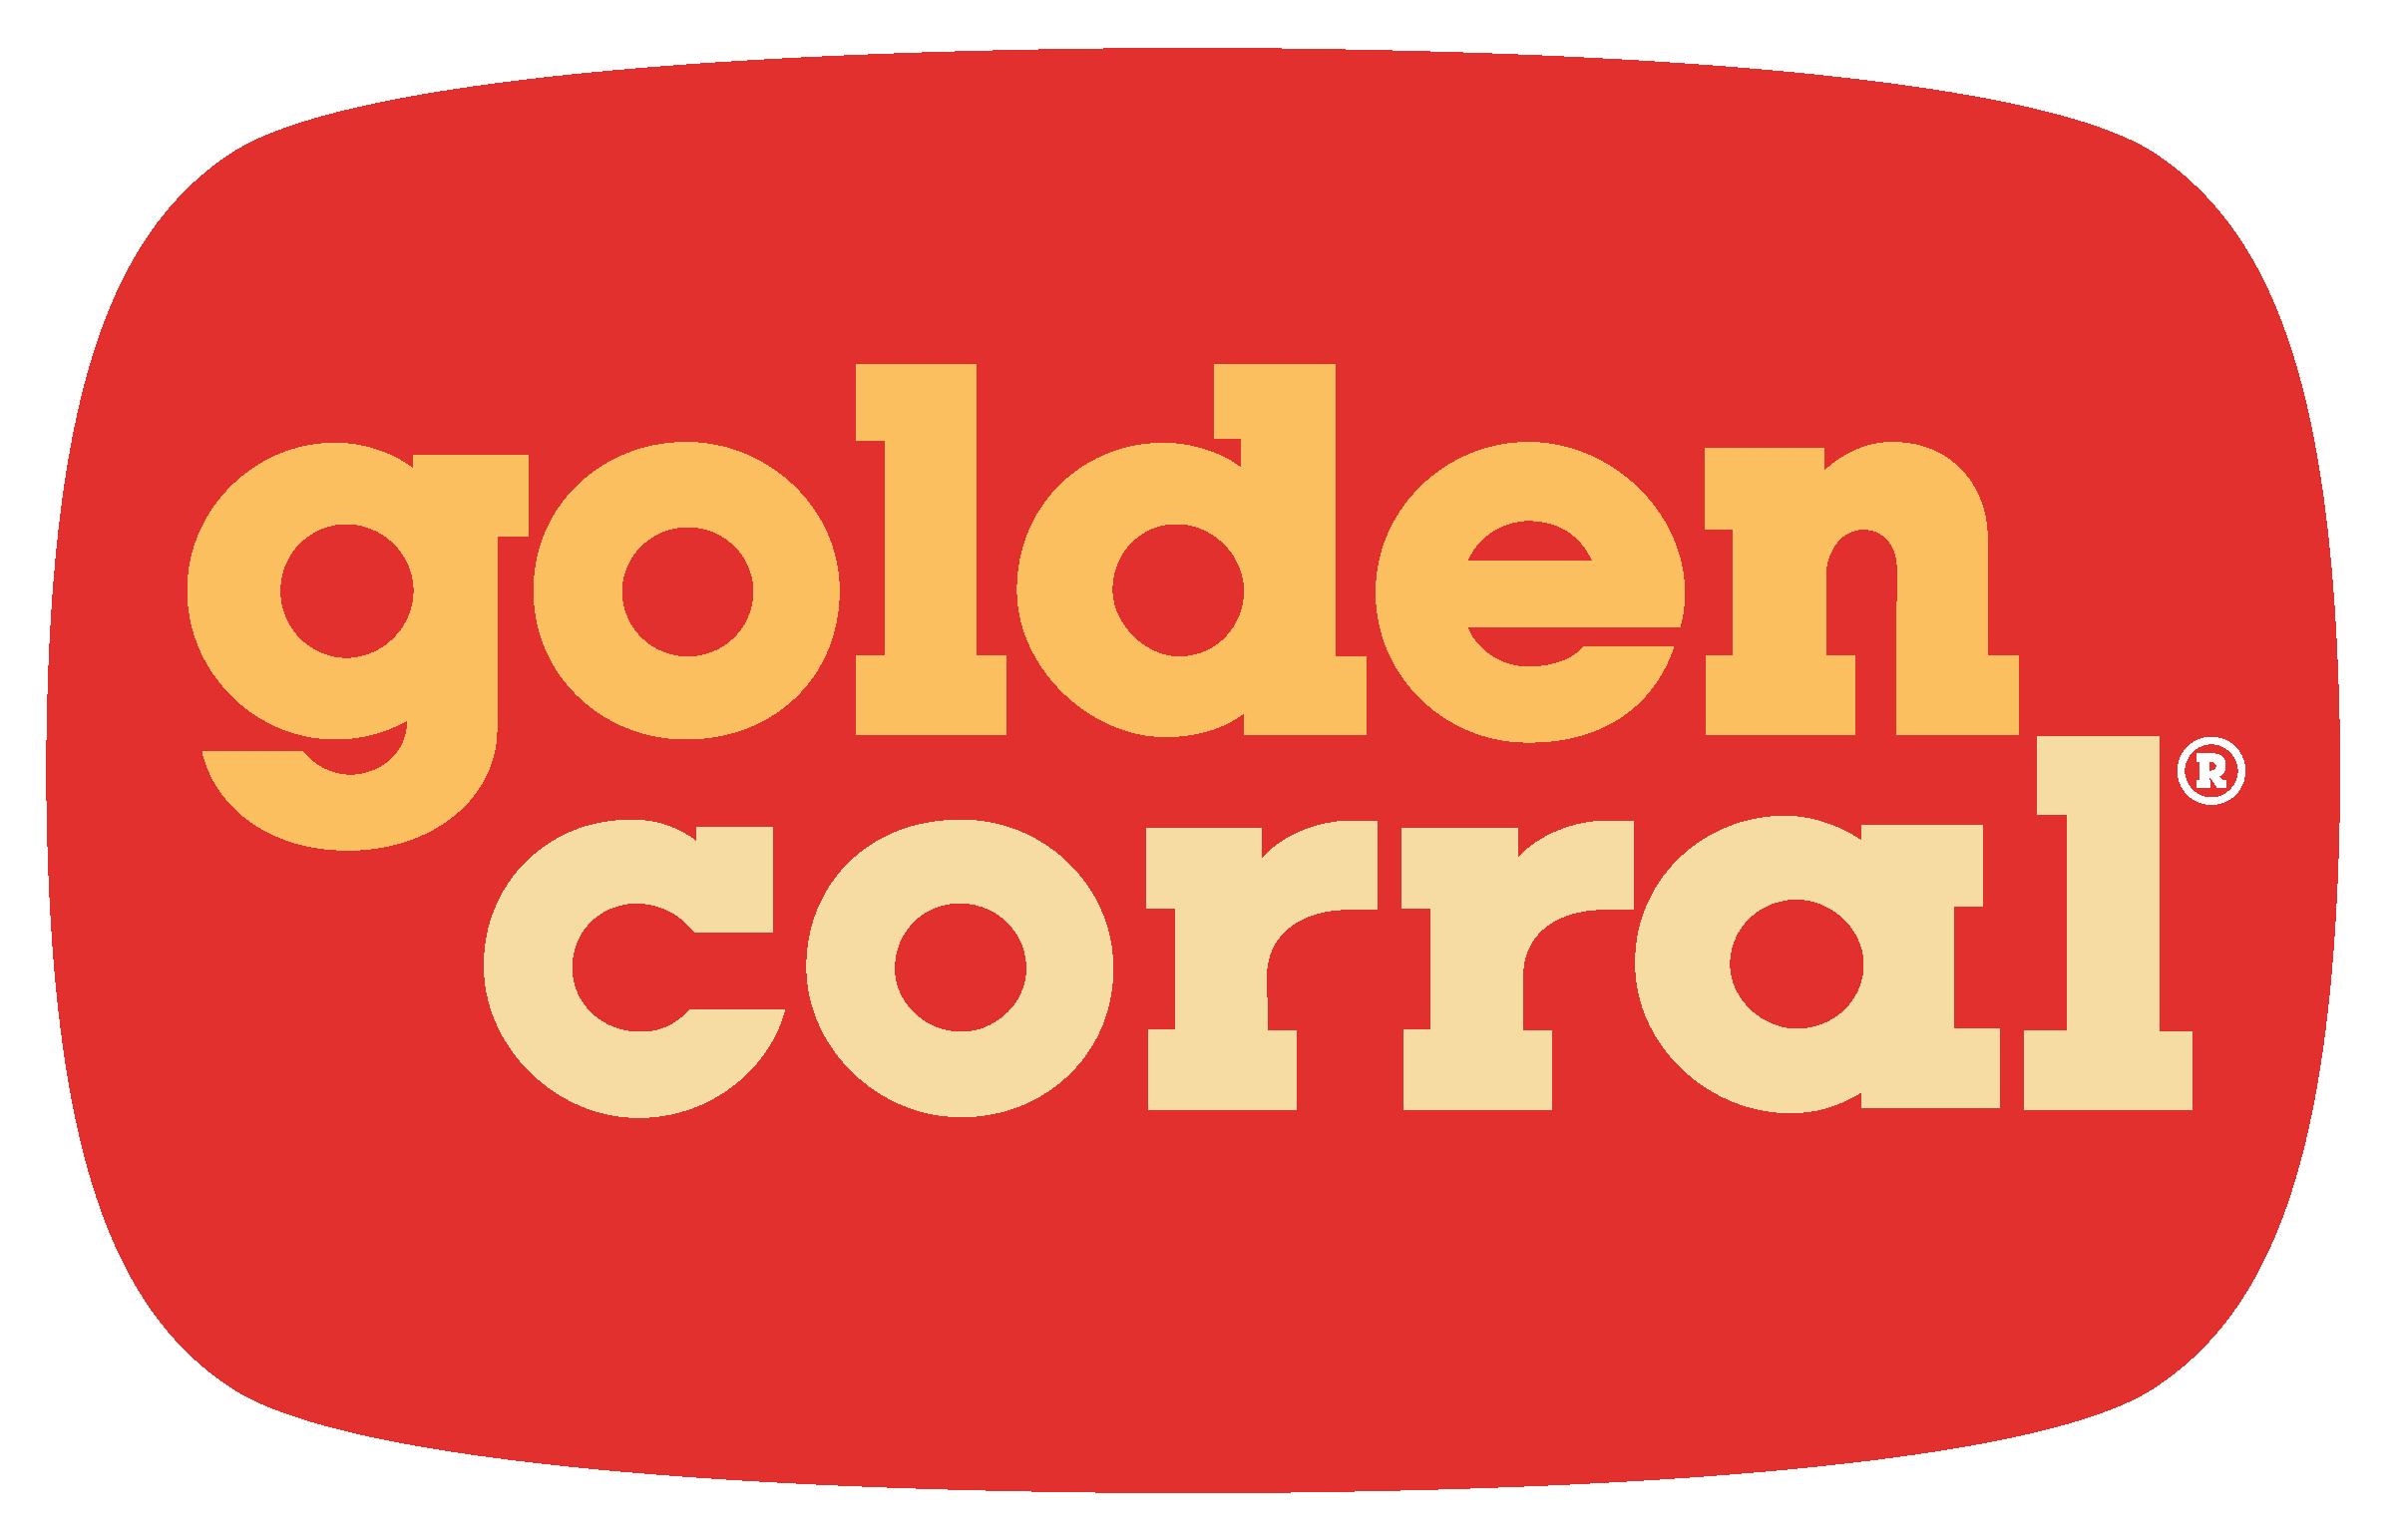 Bffet Logo - Golden Corral's Buffet and Grill